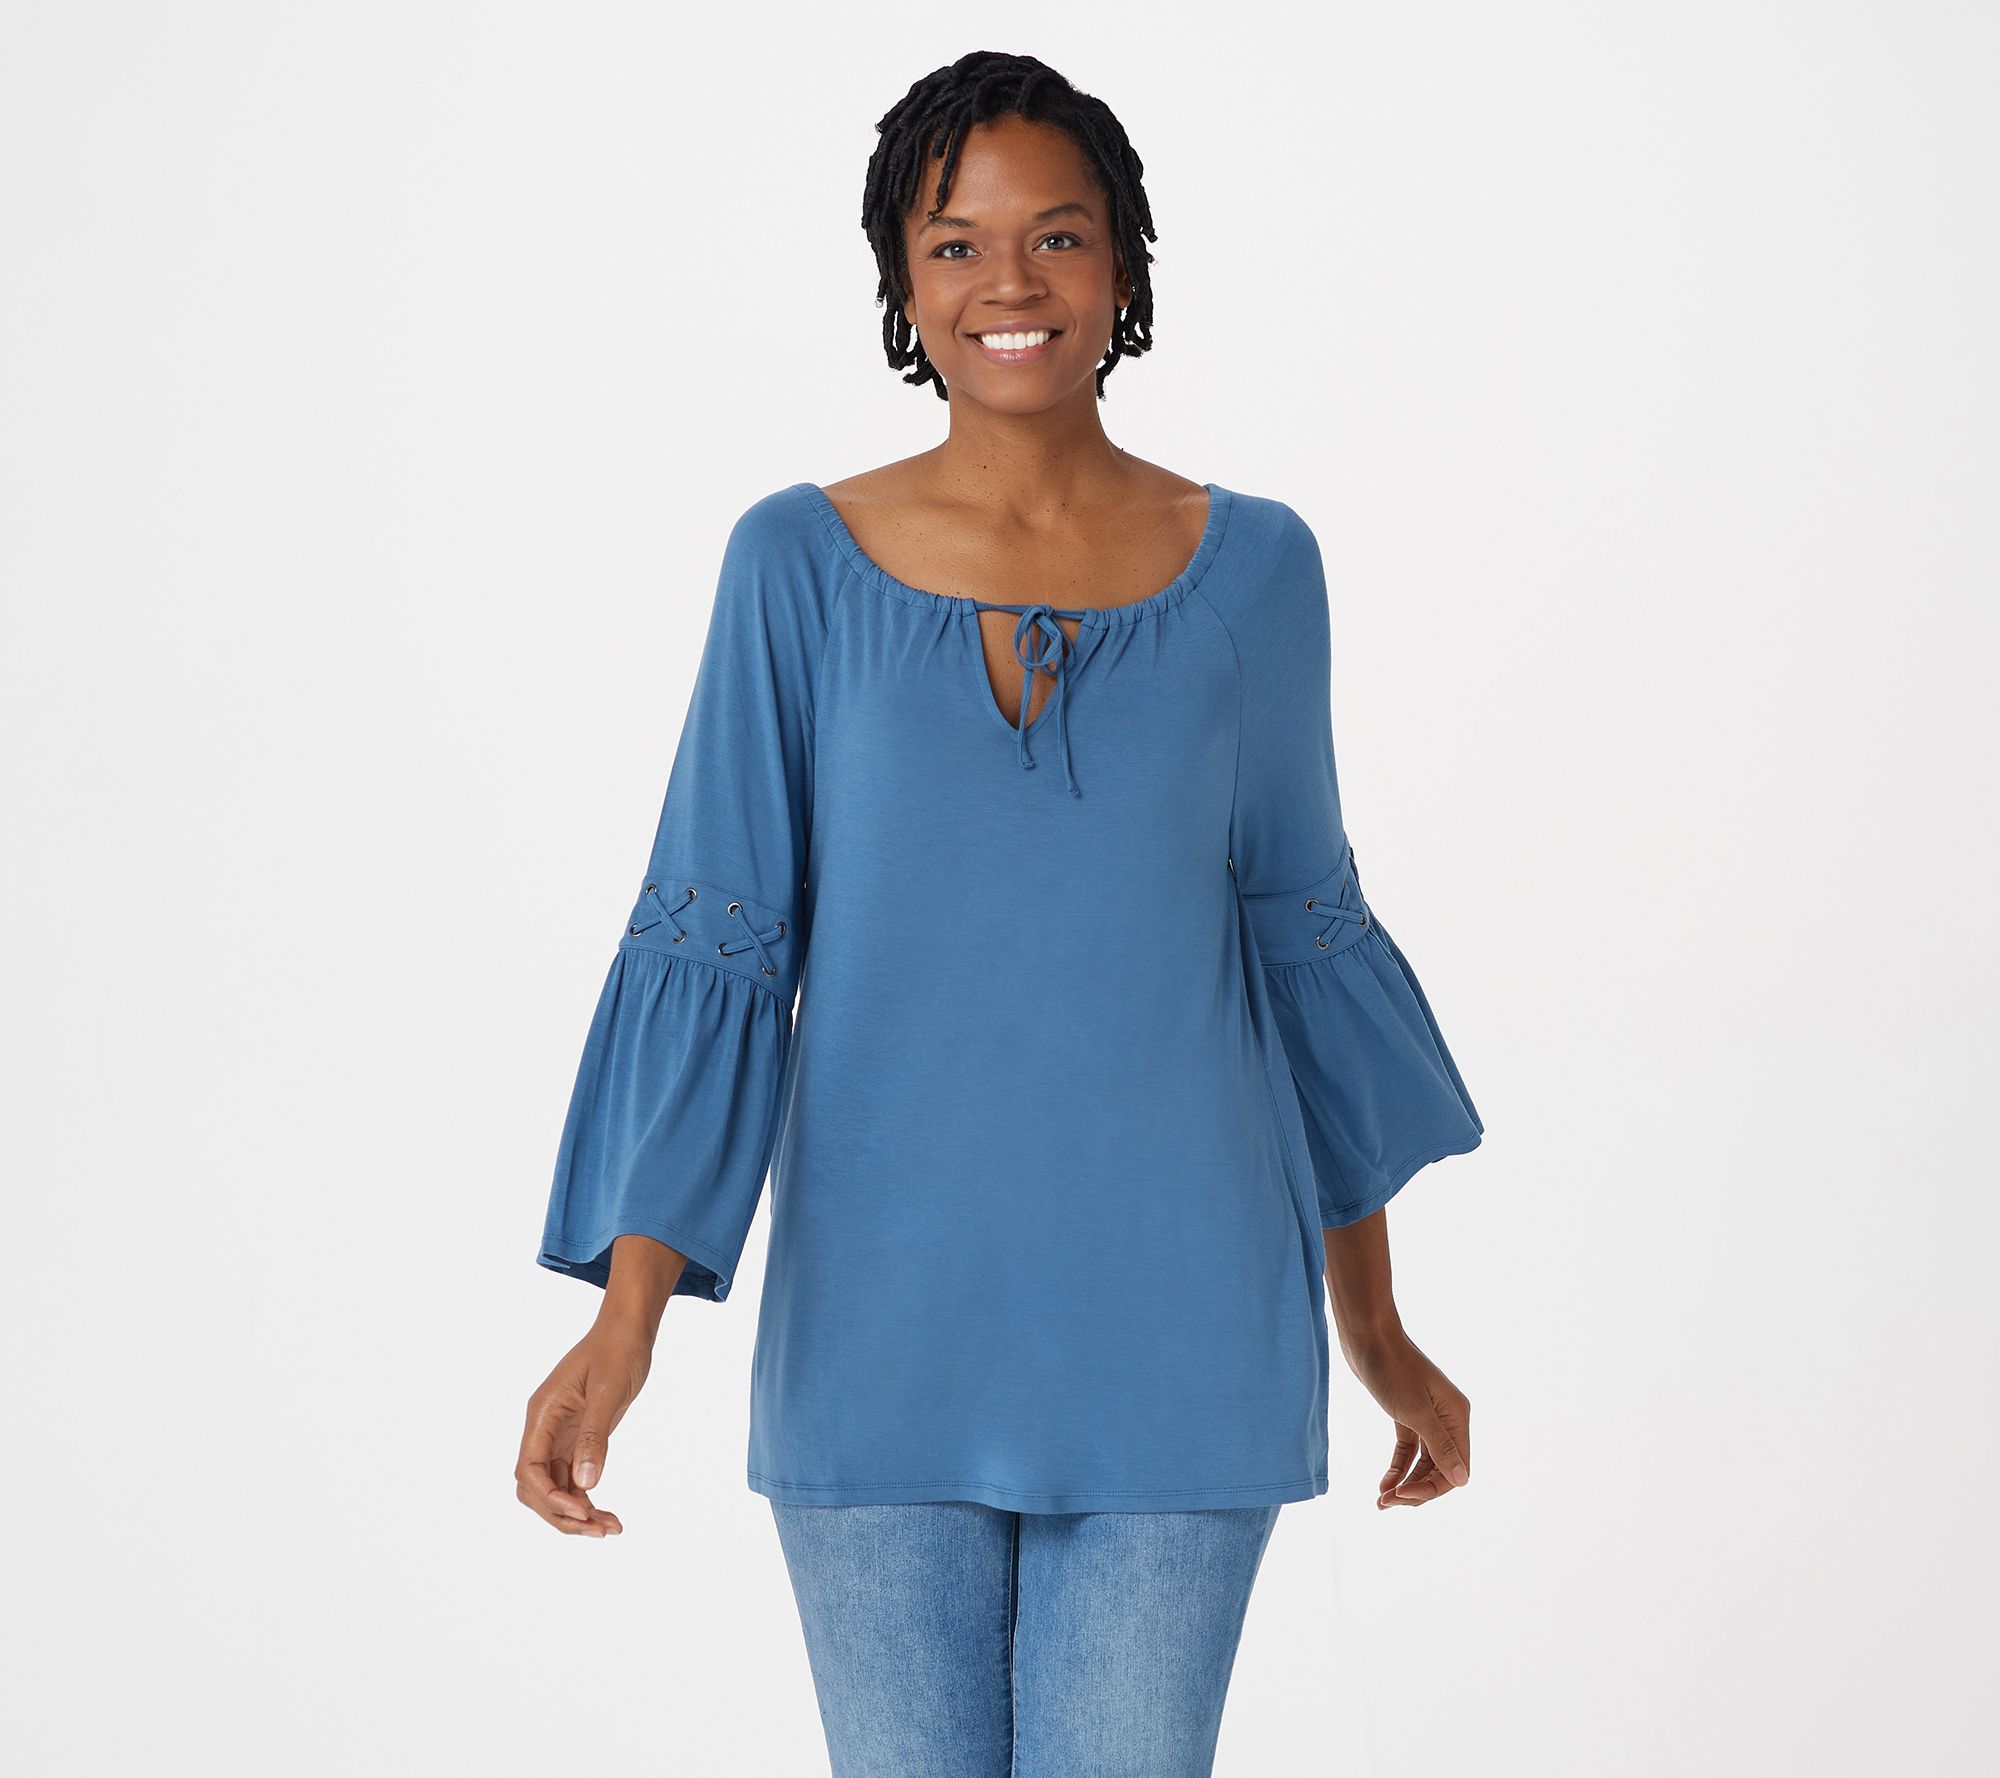 Haute Hippie Tribe Knit Top w/ Bell Sleeve and Lace Up Detail - QVC.com